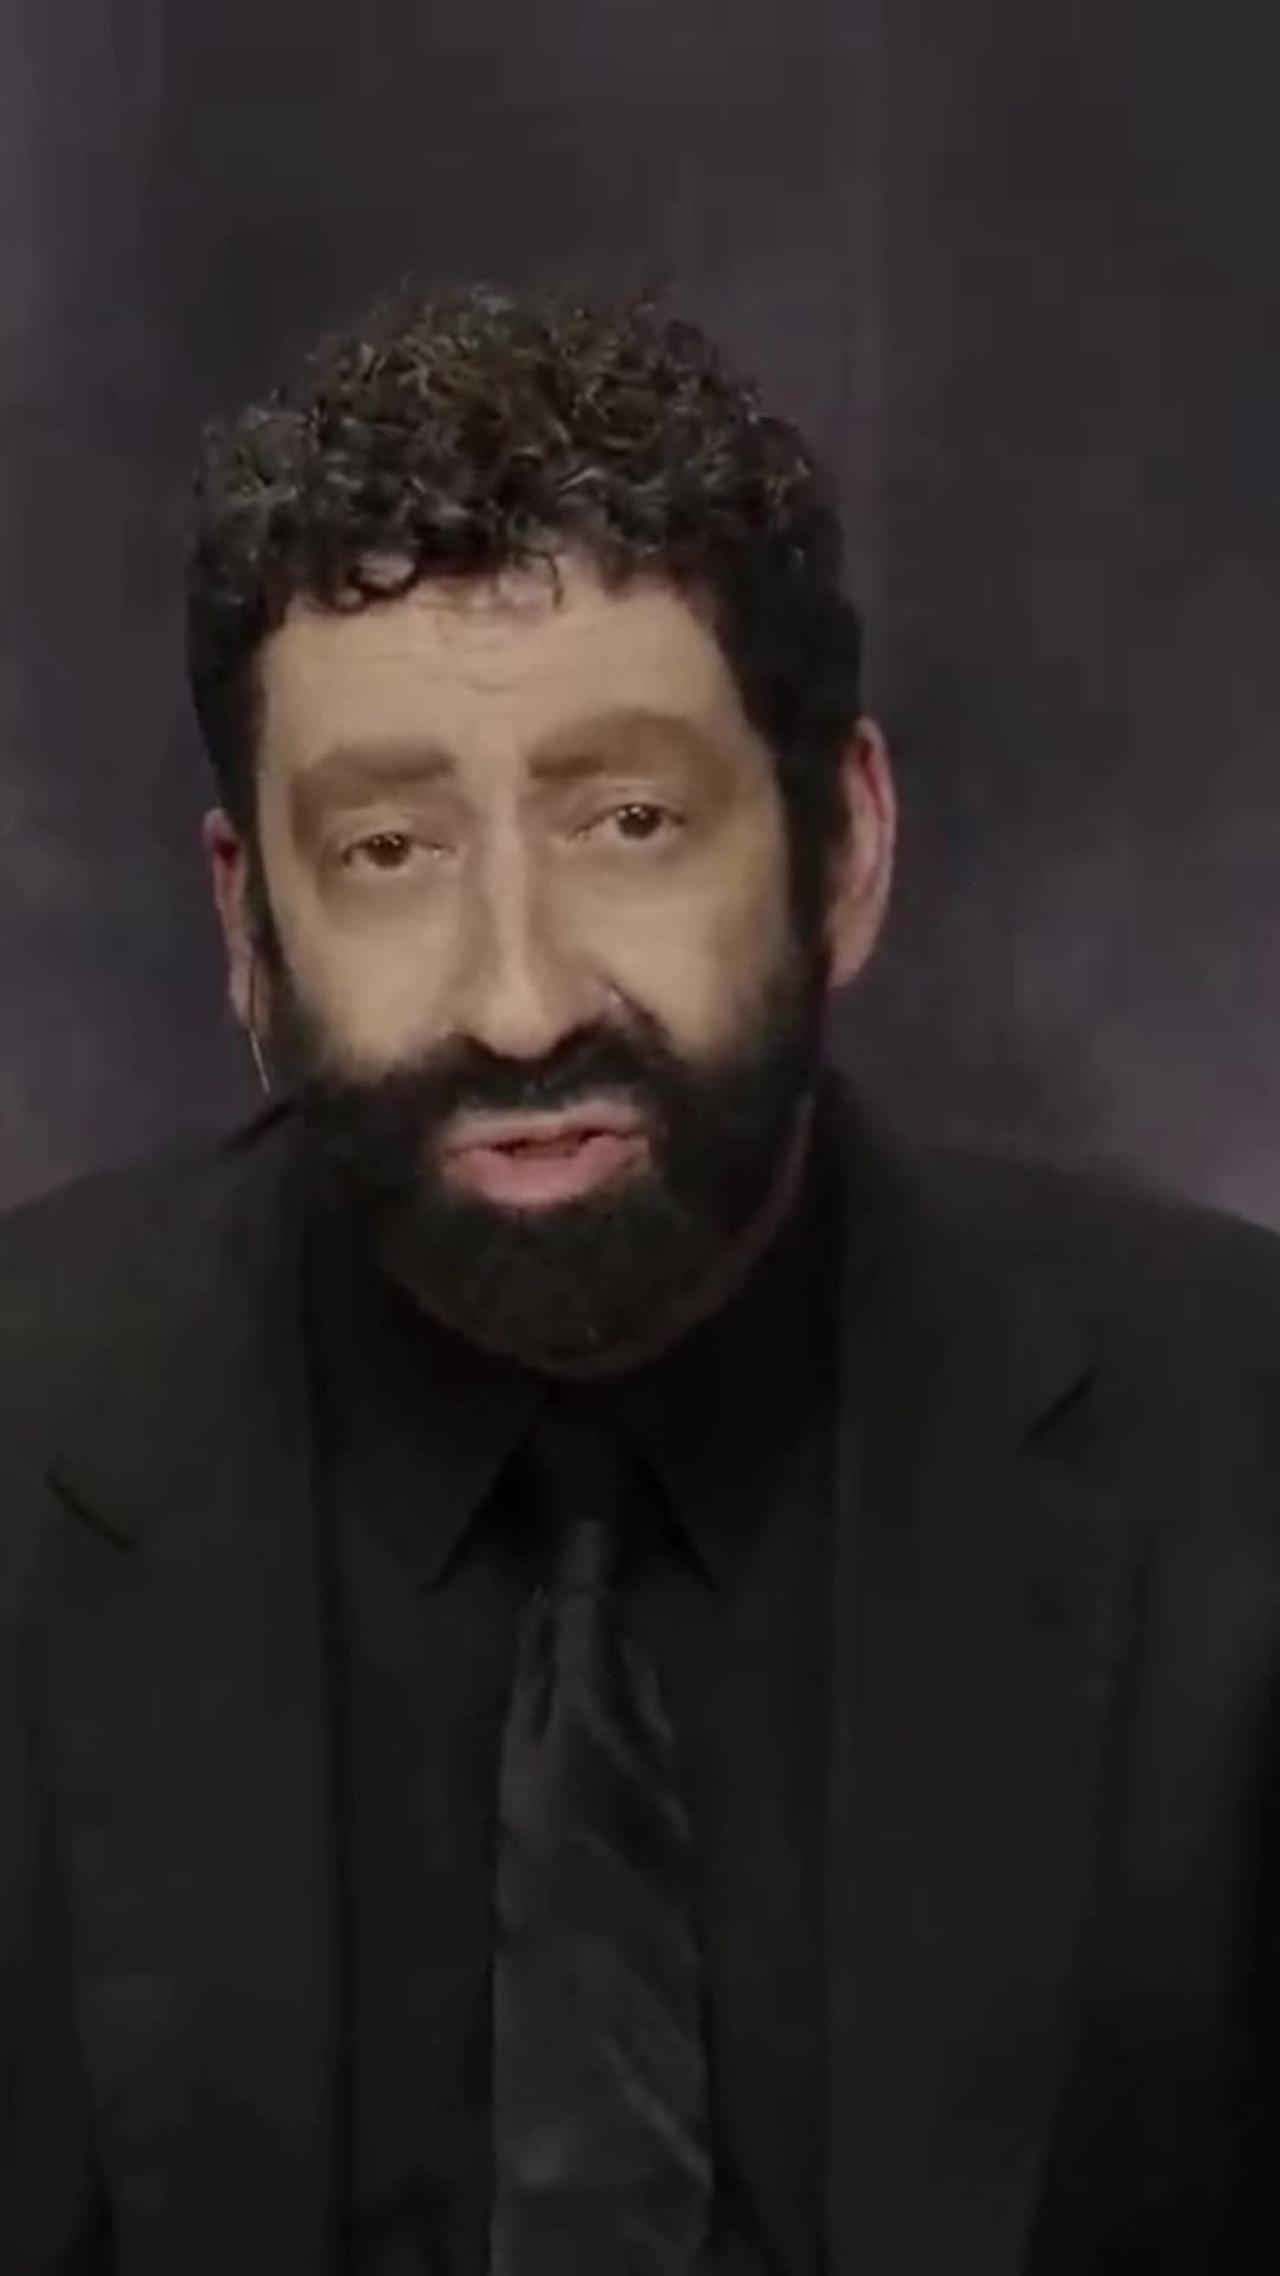 Jonathan Cahn the Iranian Mystery Iran President Attacks Israel and Dies In Plane Crash Right After